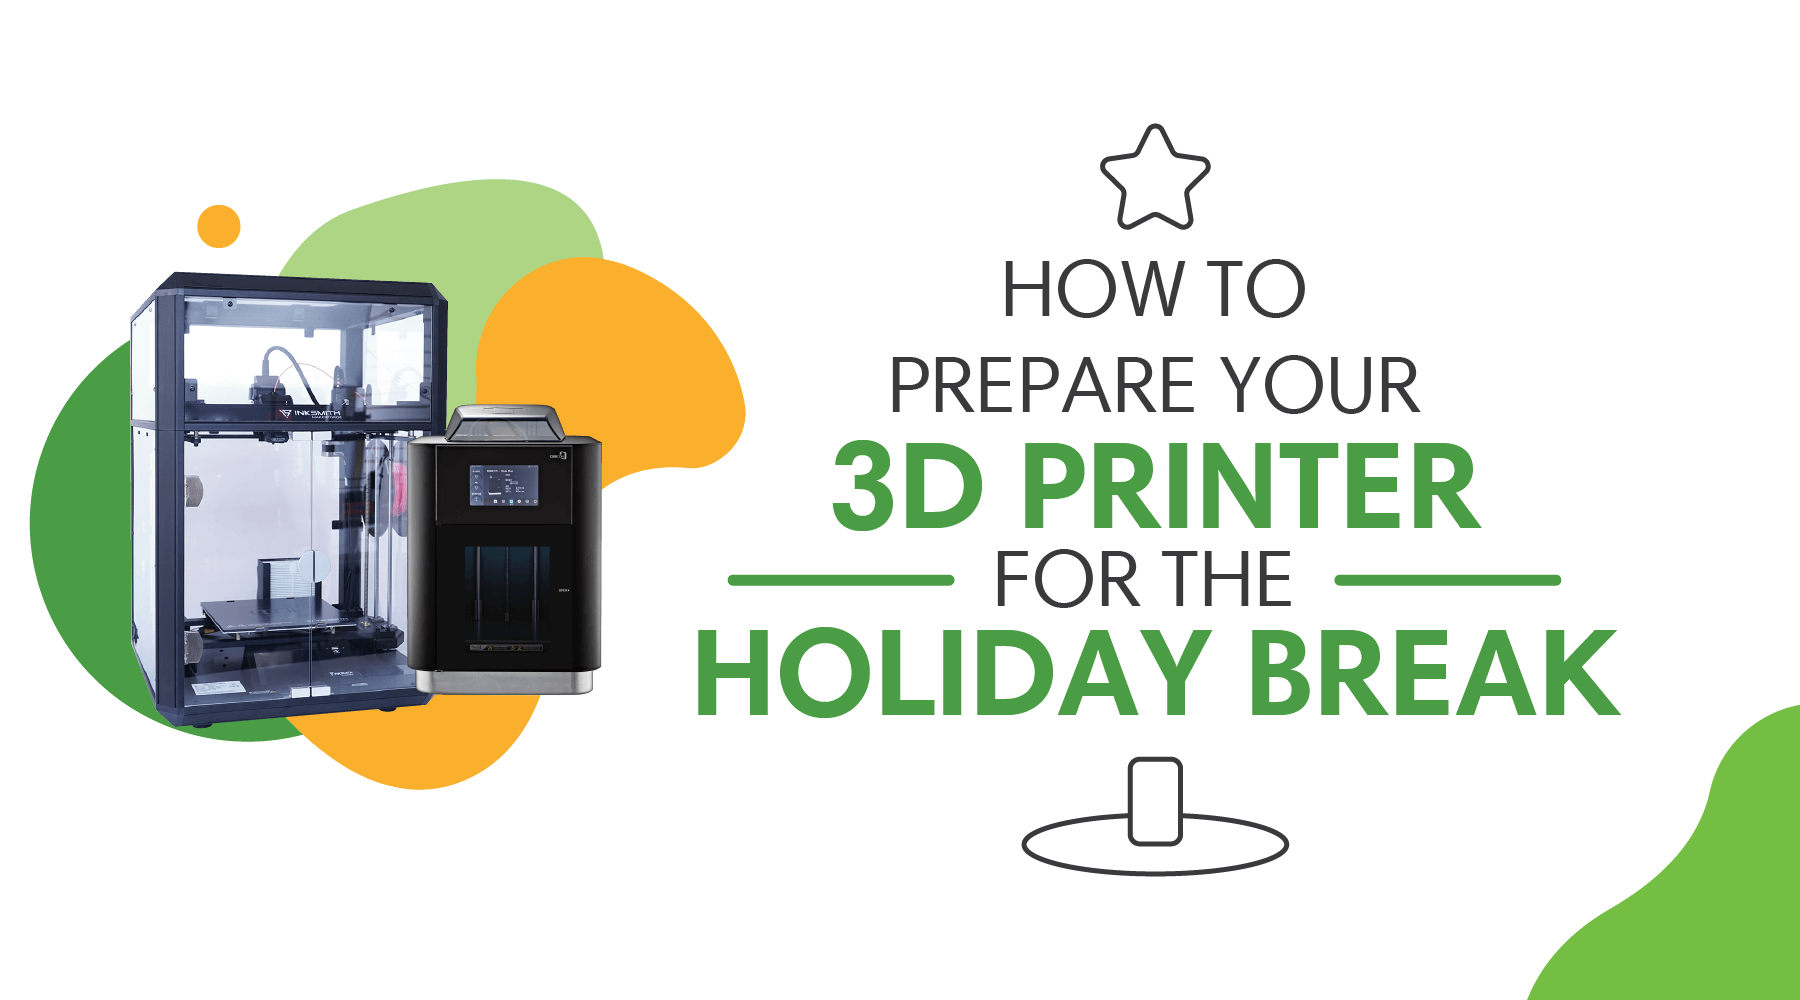 How to prepare your 3D printer for the holiday break